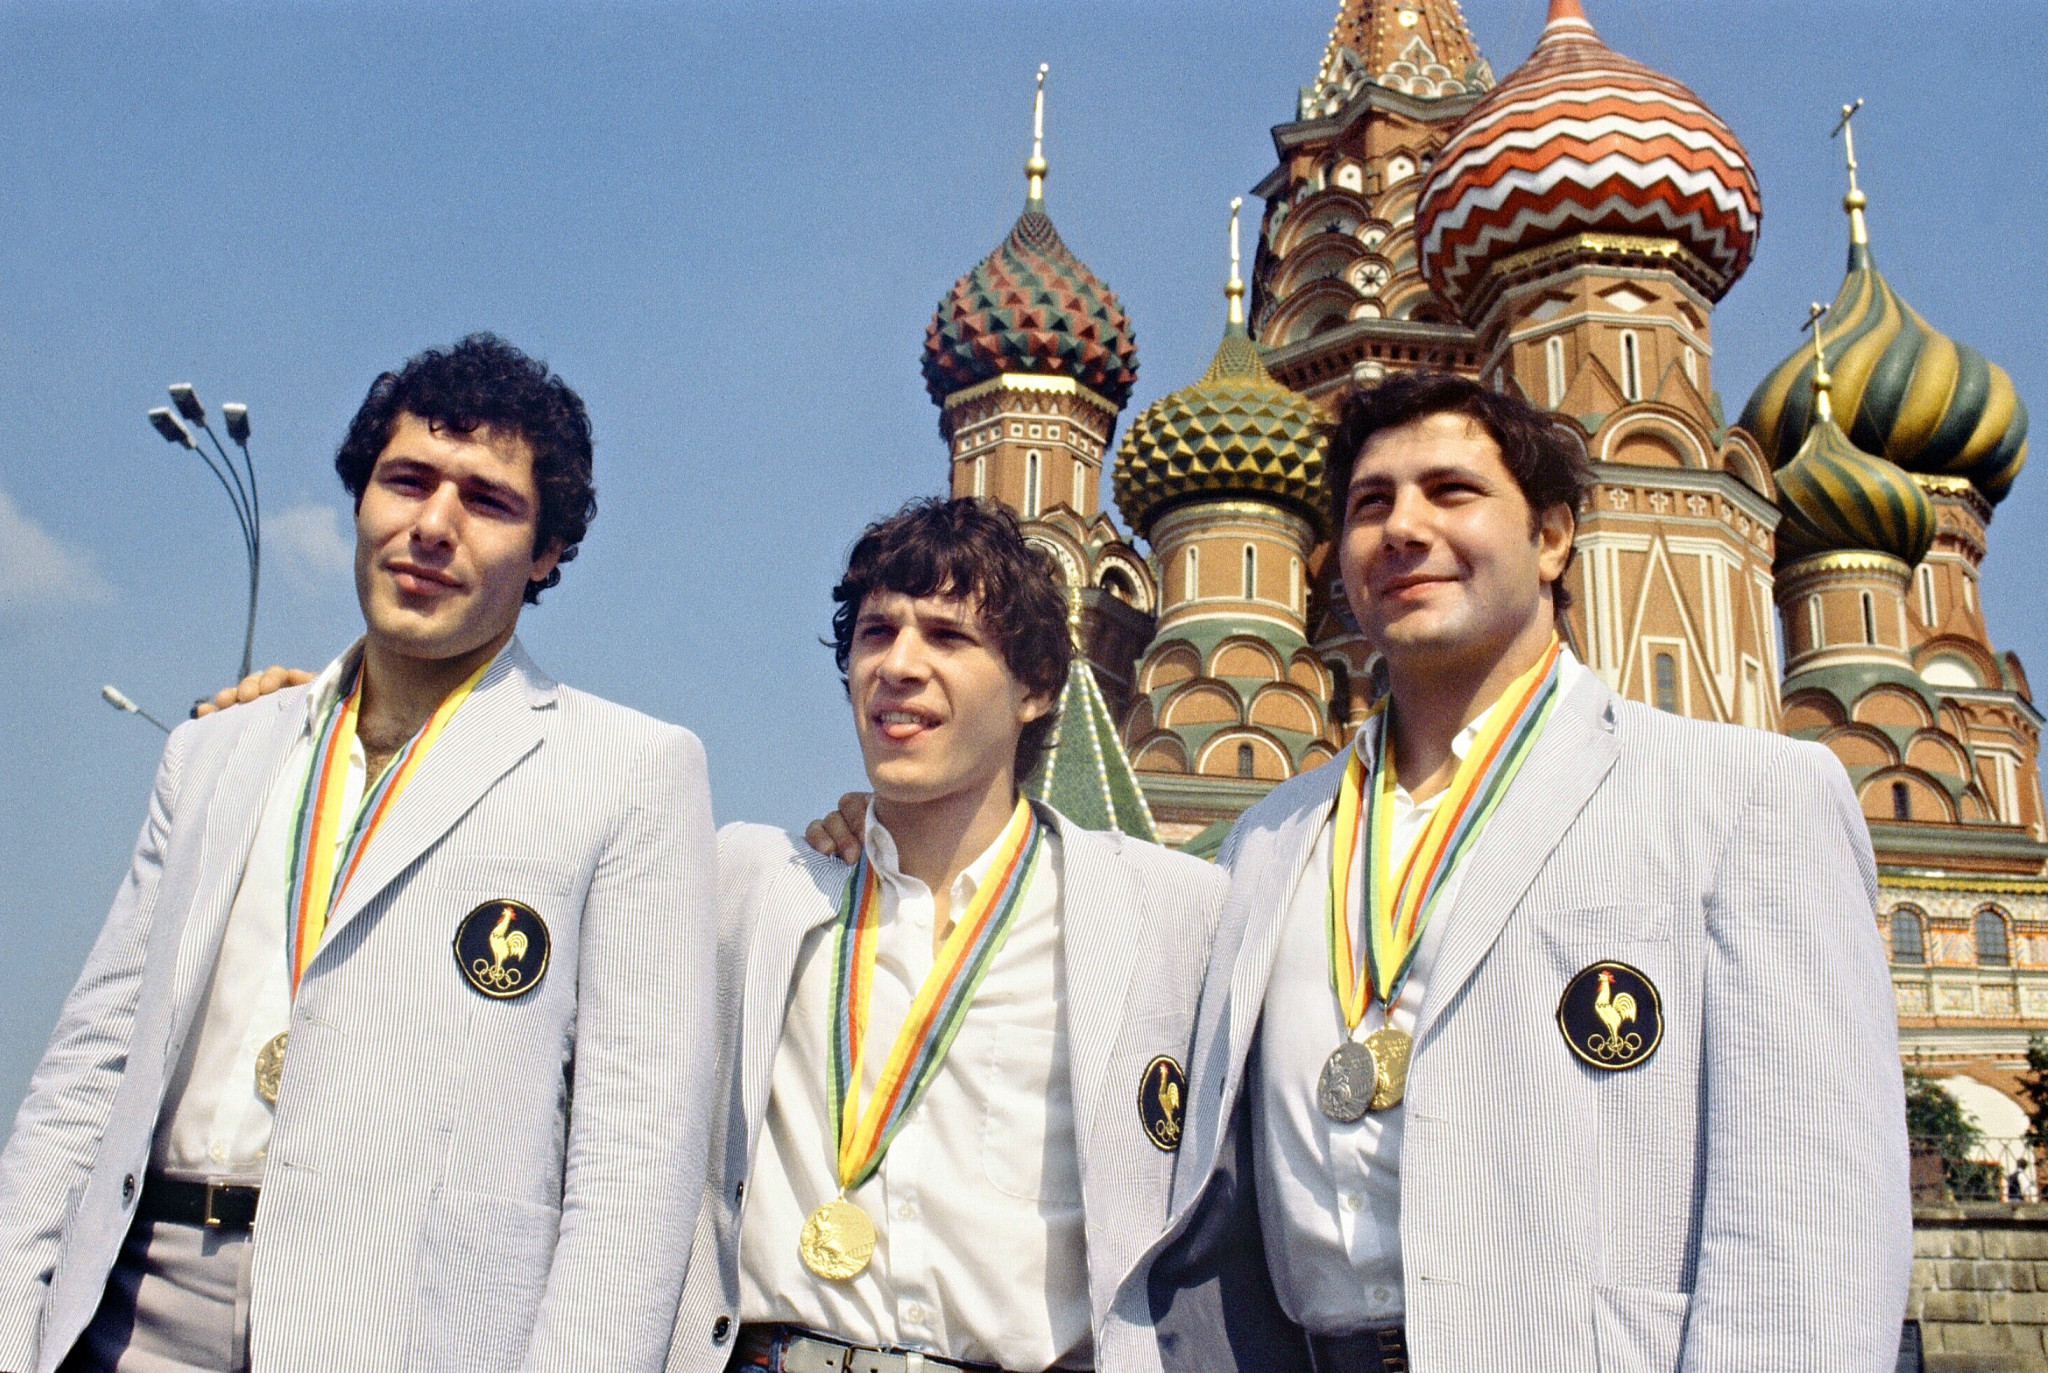 French judokas, medalists at the1980 Olympic Games face the cameras in front of Saint-Basil, Moscow Red Square ©Getty Images